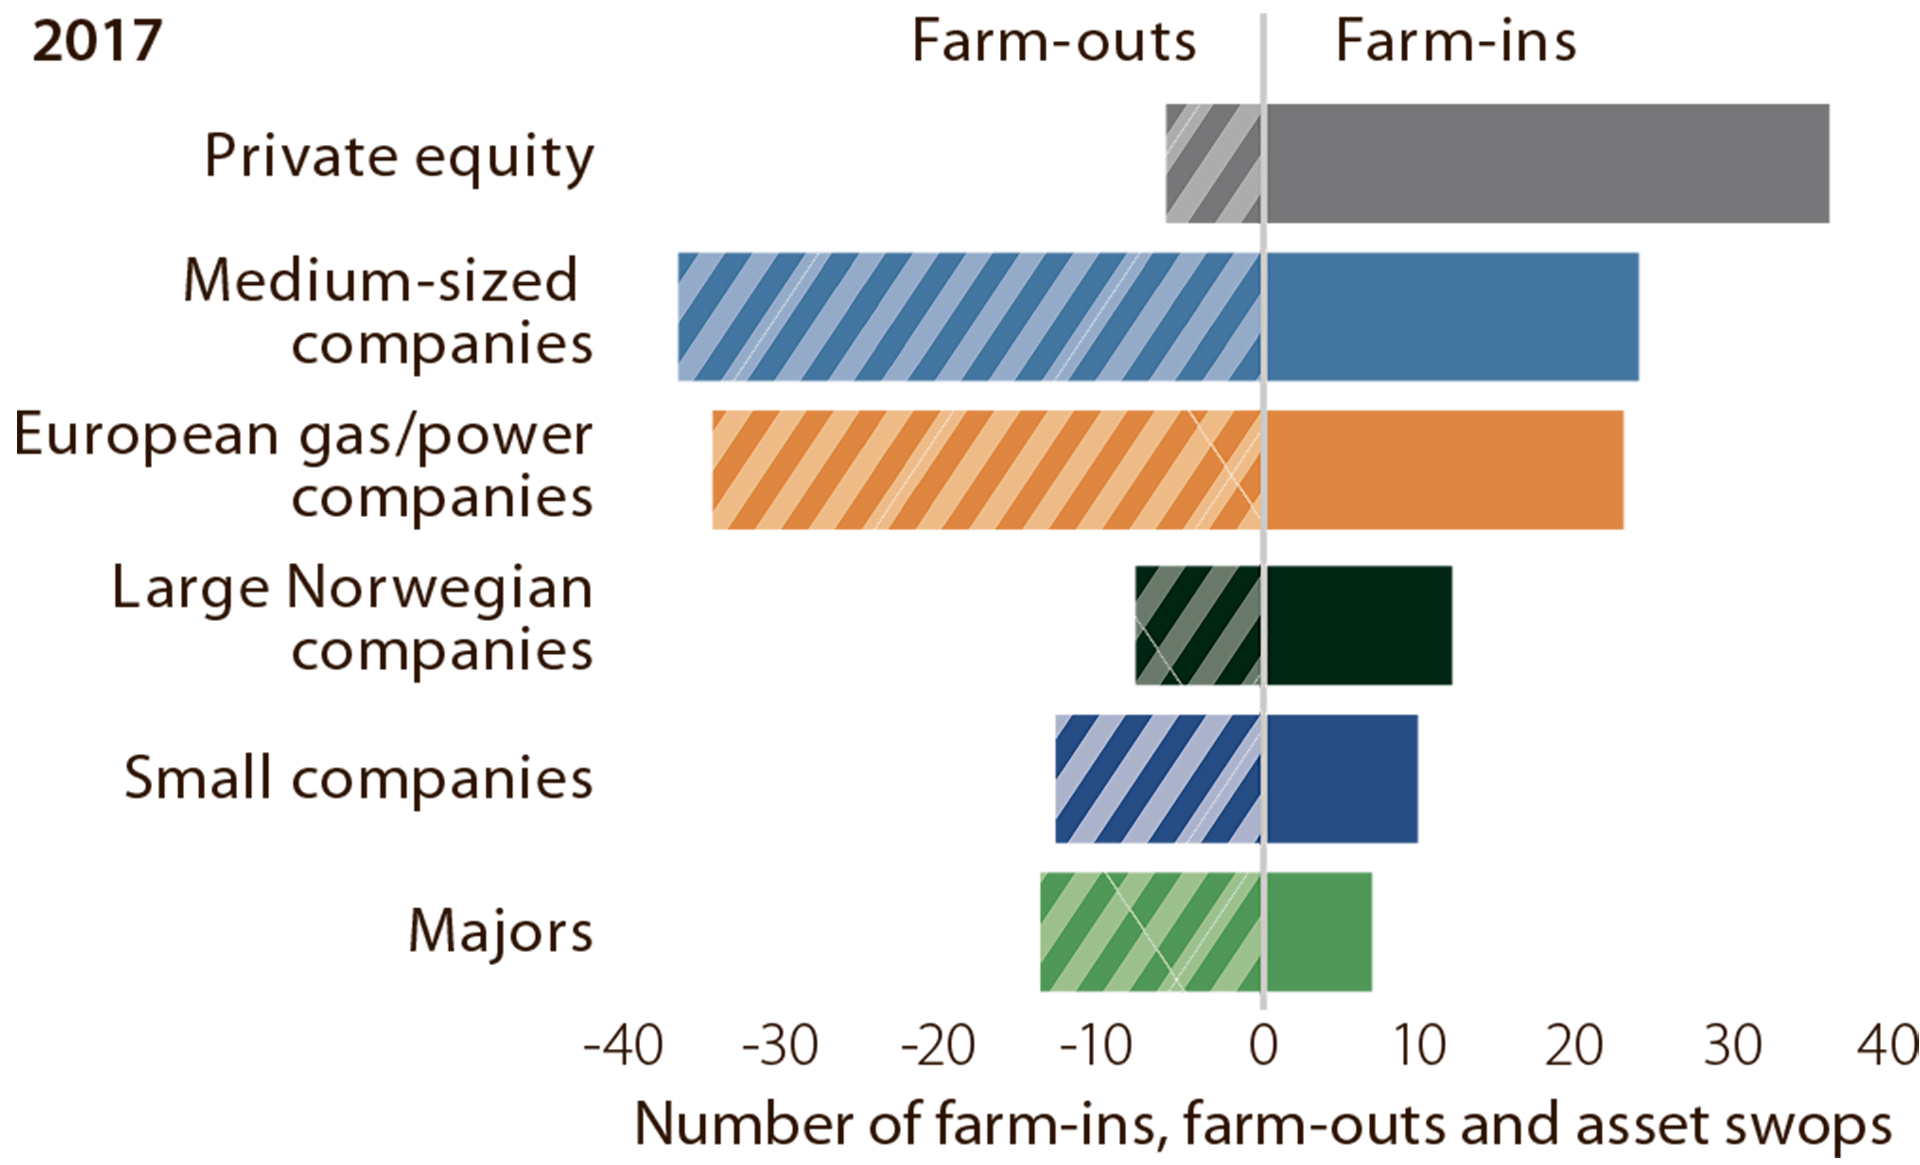 Figure 5.3 Farm-ins, farm-outs and swops of licence interests on the NCS in 2017.